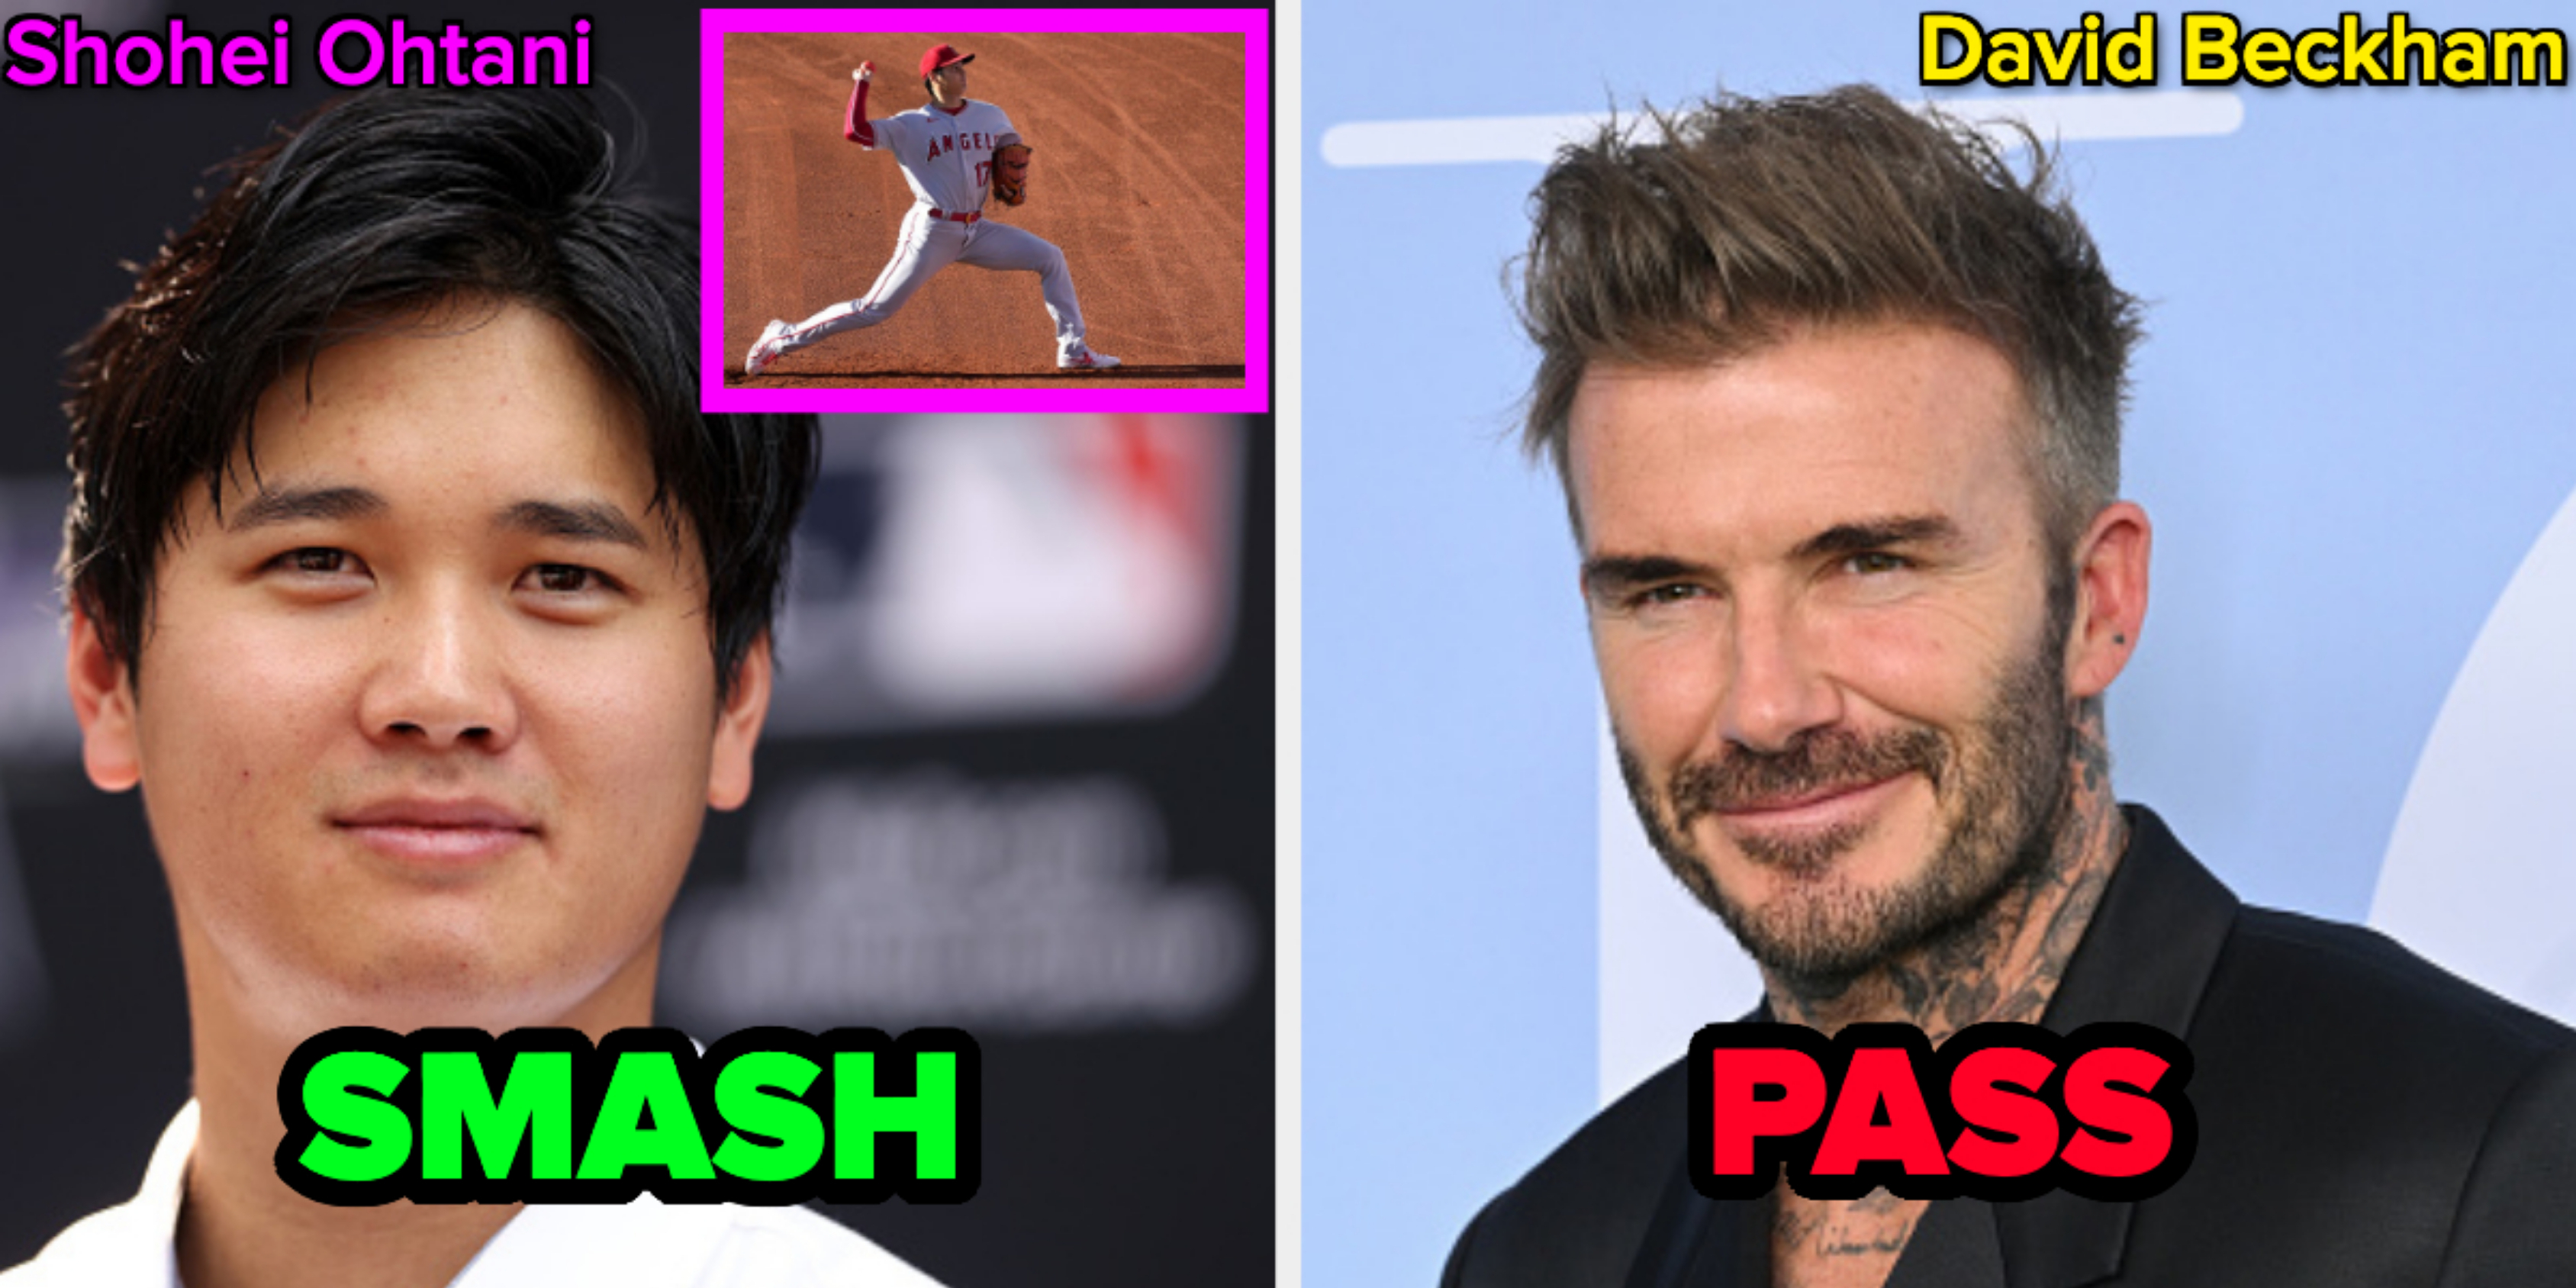 Smash Or Pass: Famous Athletes